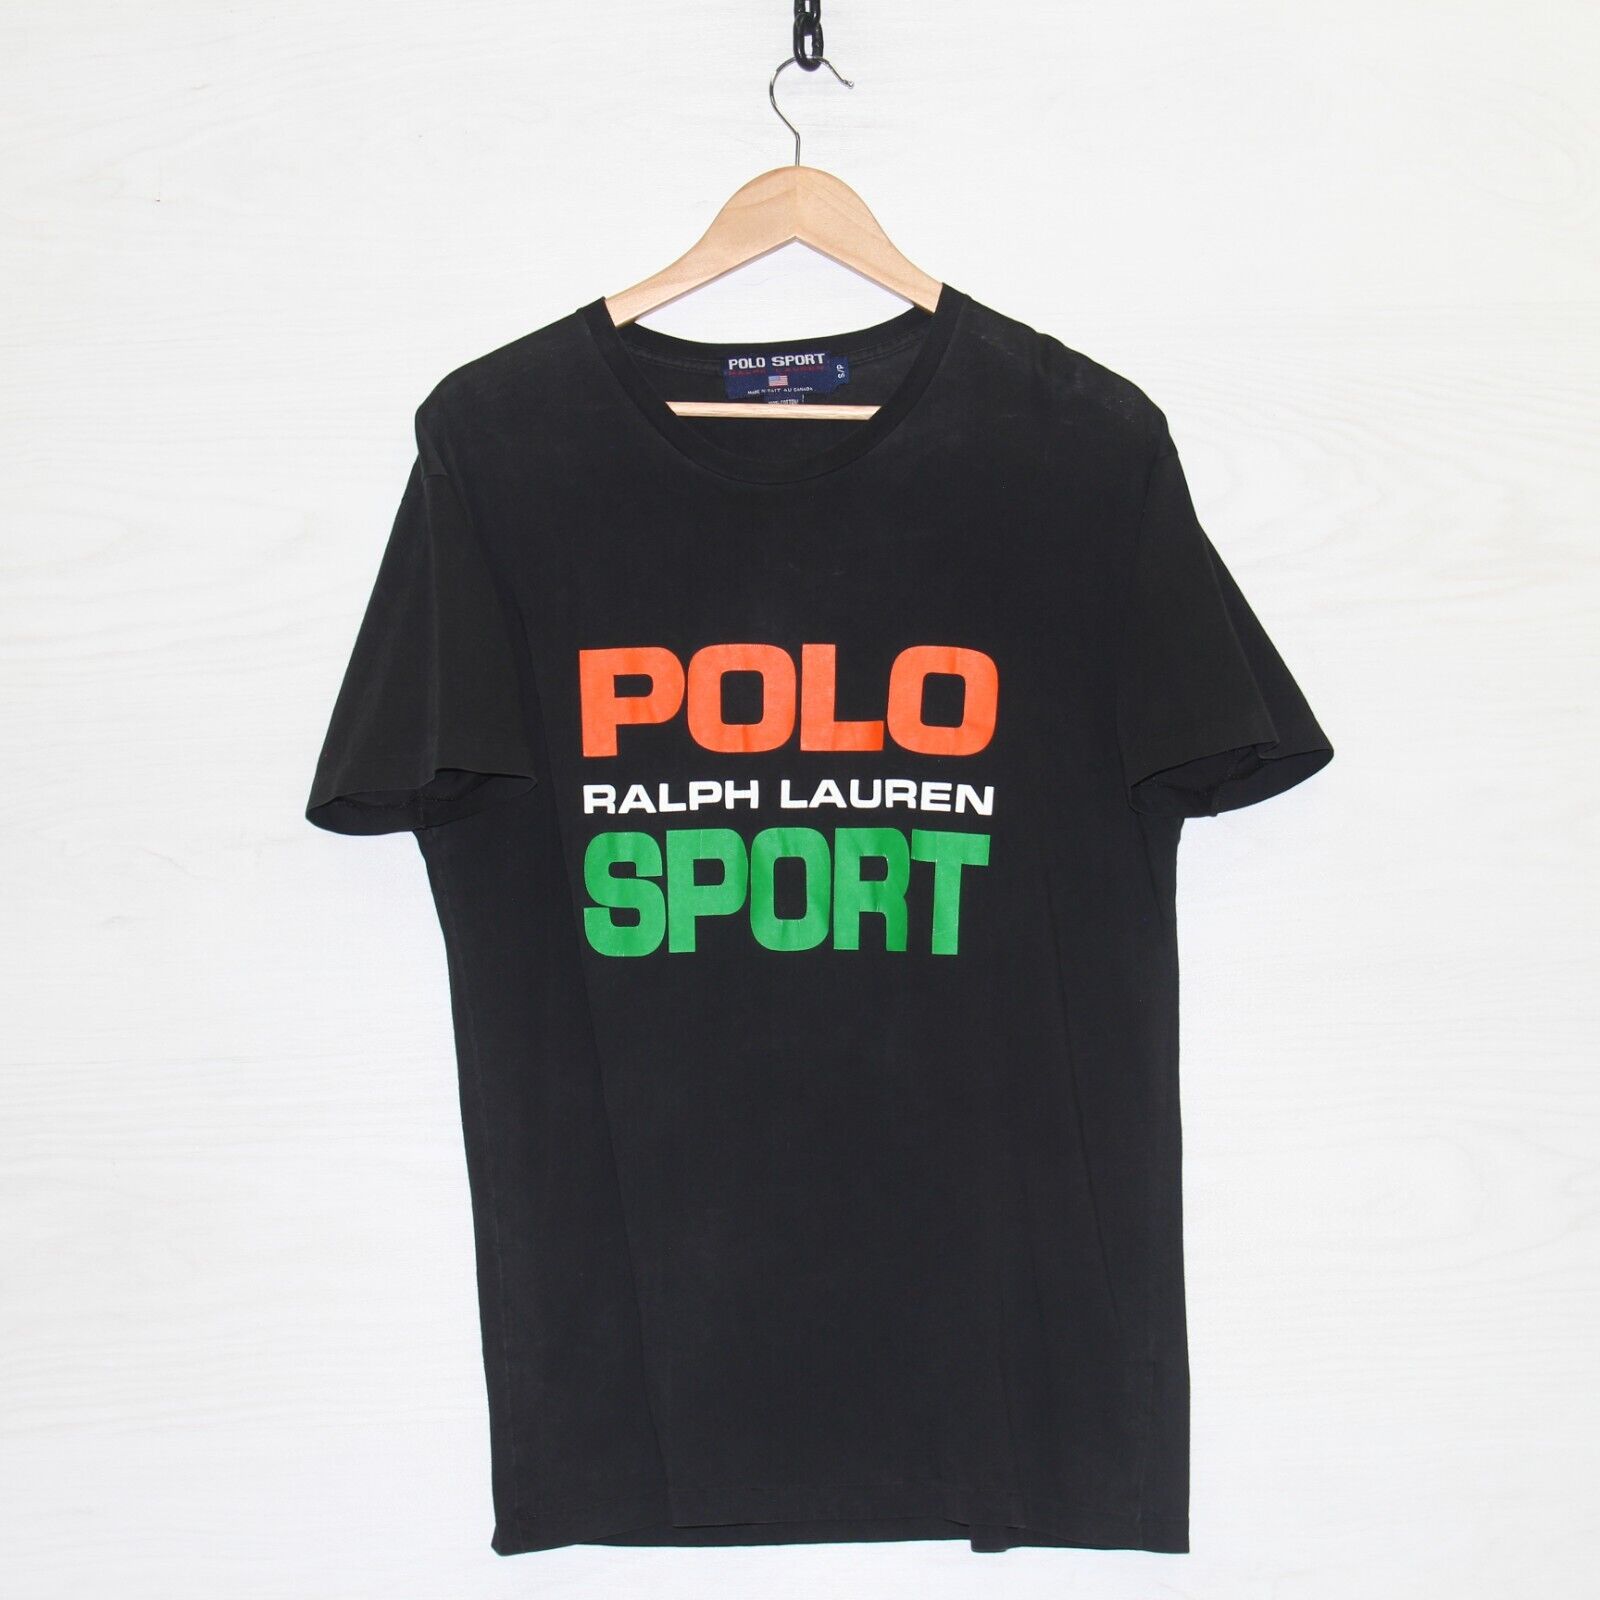 Vintage Polo Sport Ralph Lauren T Shirt Size Small s Made Canada